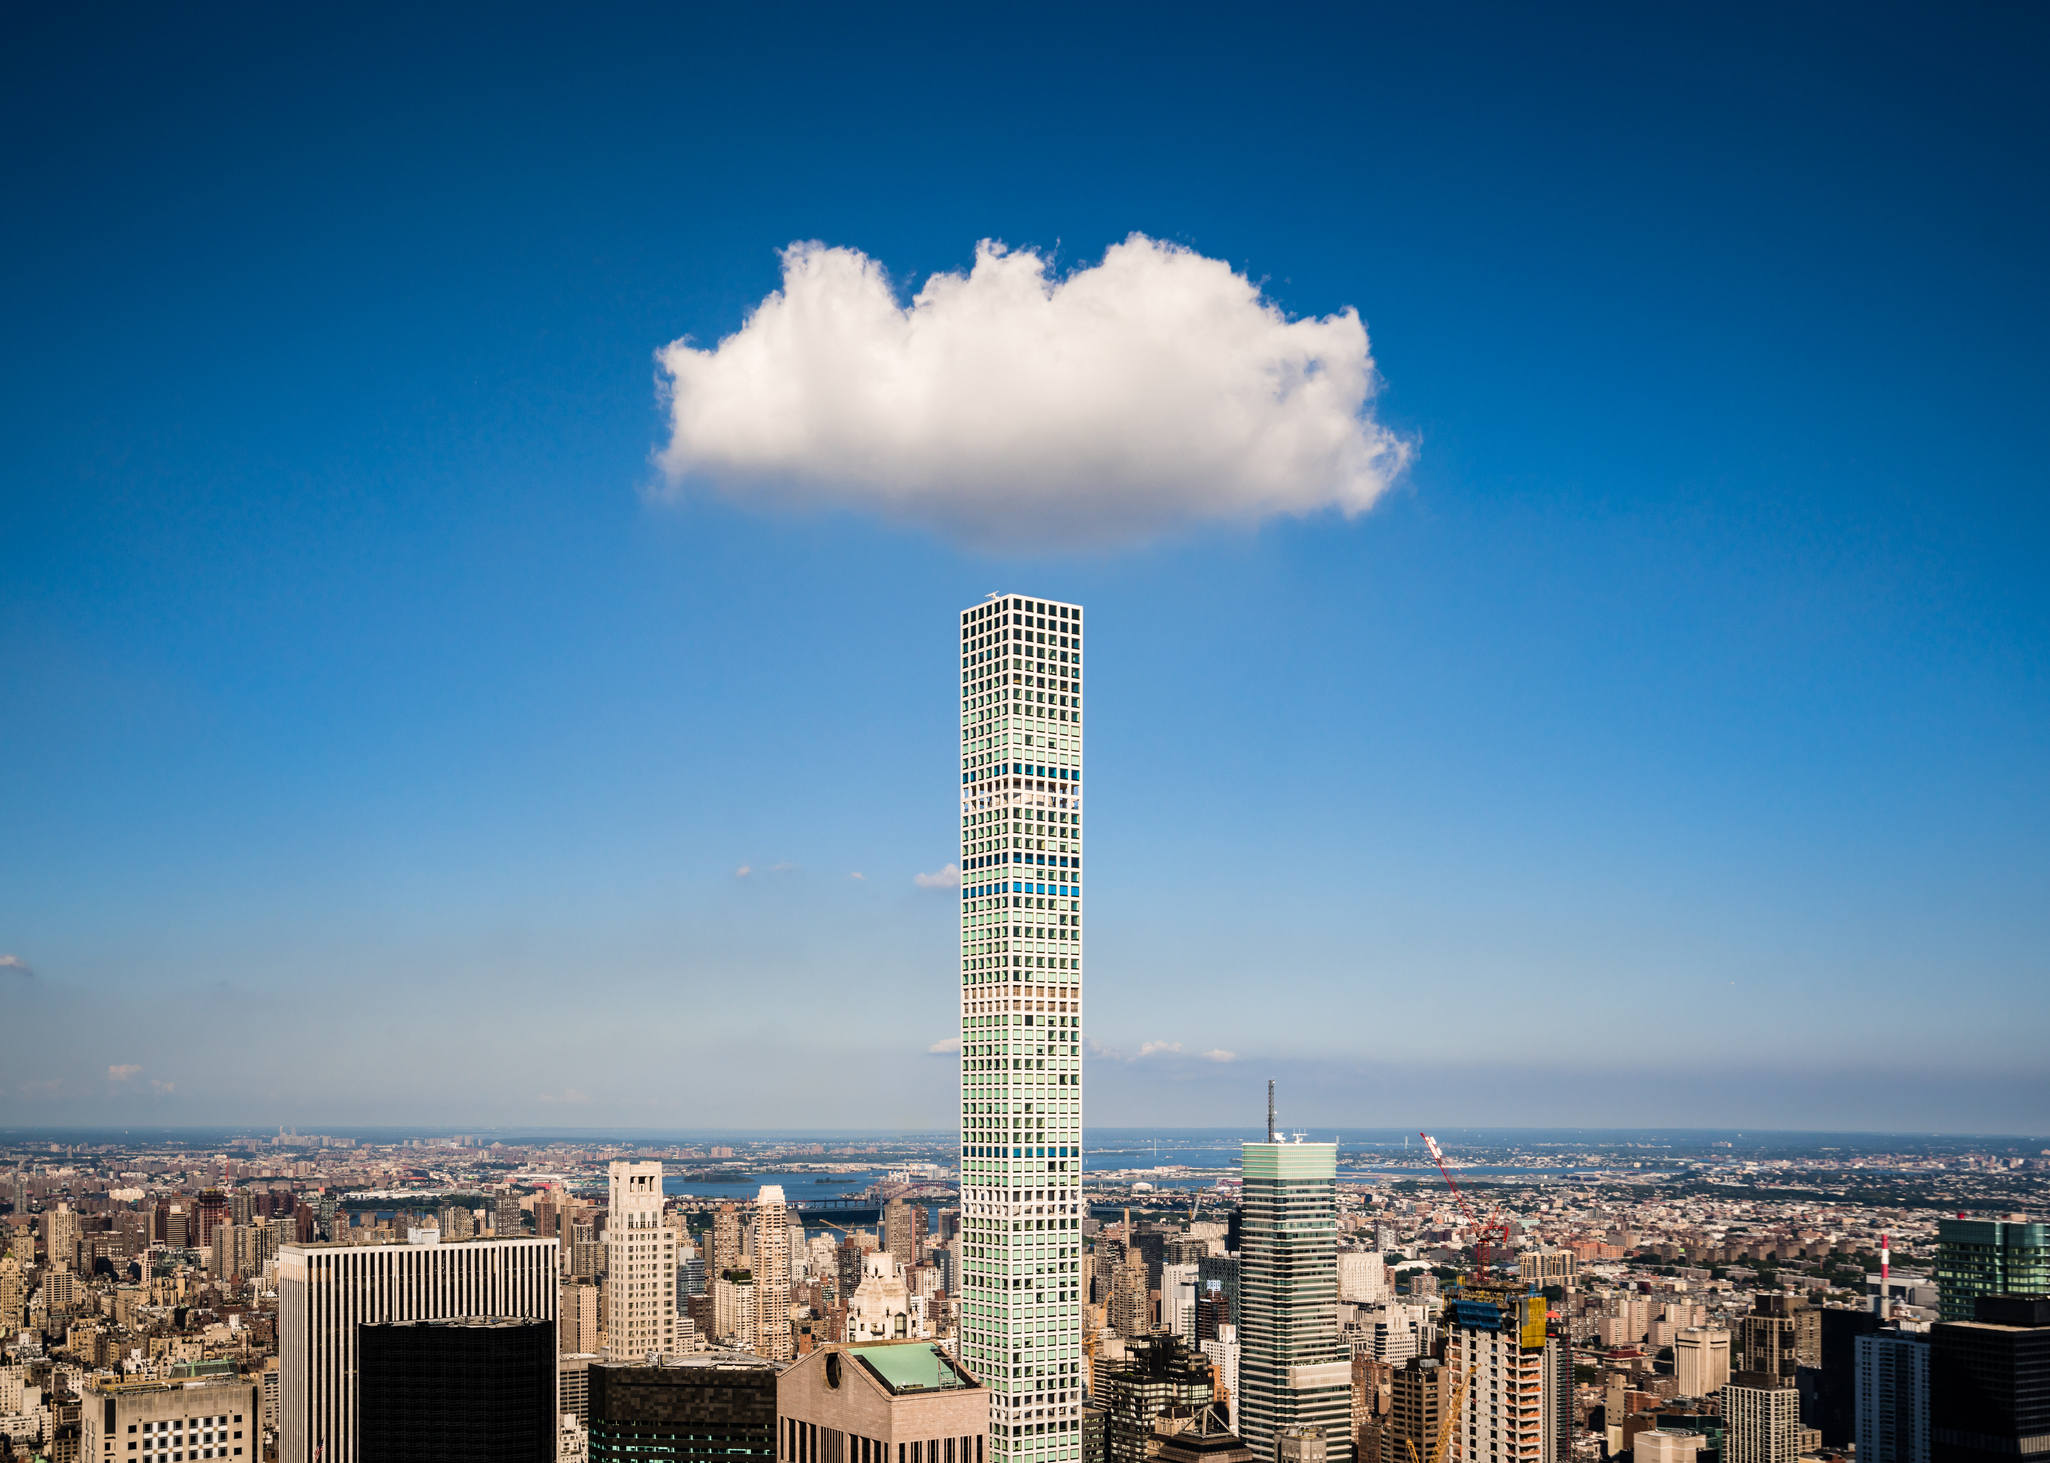 A cloud hangs over 432 Park Ave, New York City.